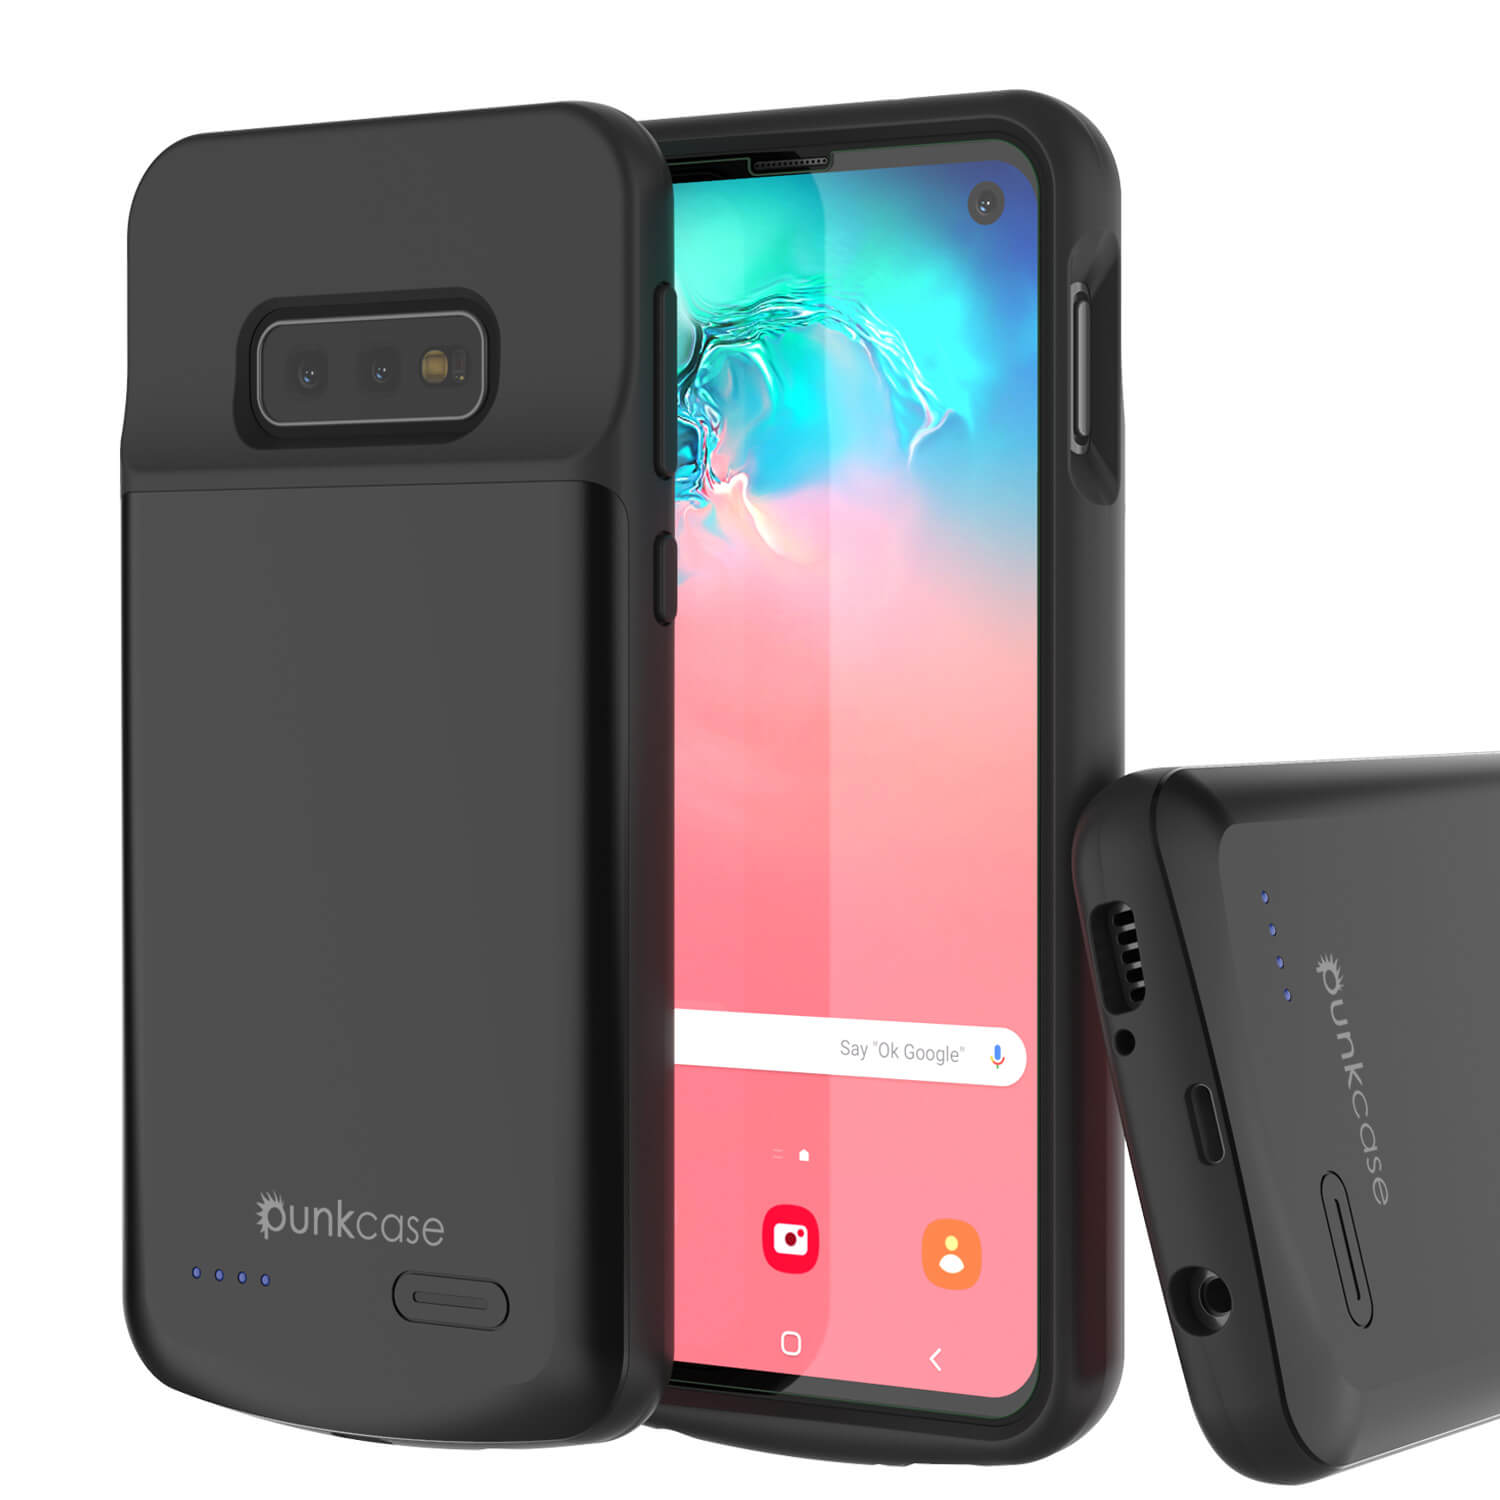 External Battery Charger Case For Samsung Galaxy S10 S10E S10 Plus Cover